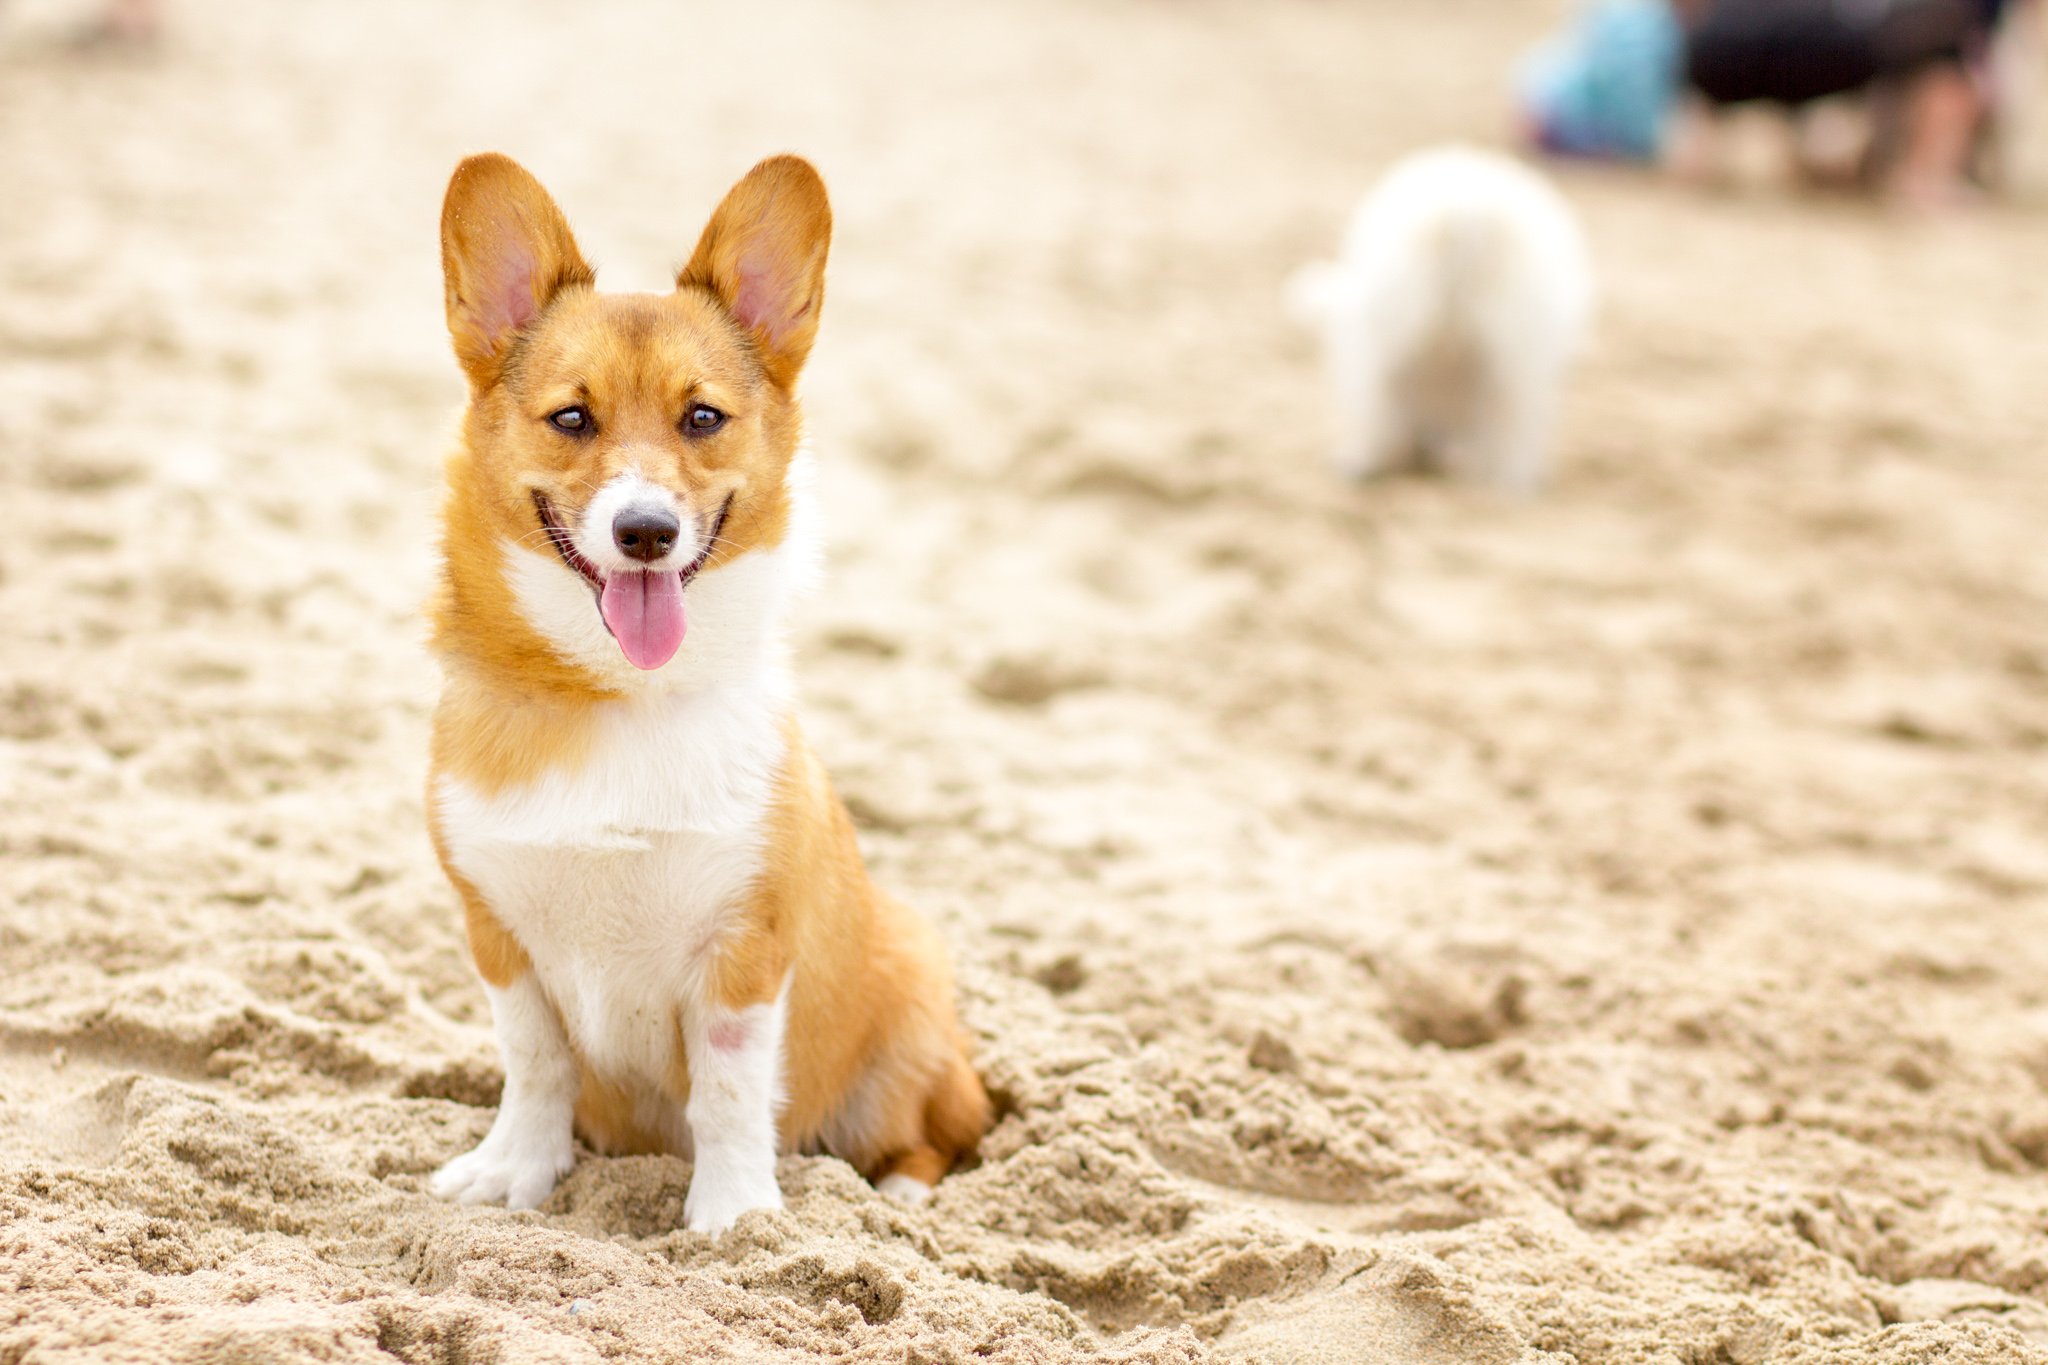 93-Orange County Pet and Dog Photography - by Steamer Lee - Corgi Beach Day - Southern Caliornia.JPG